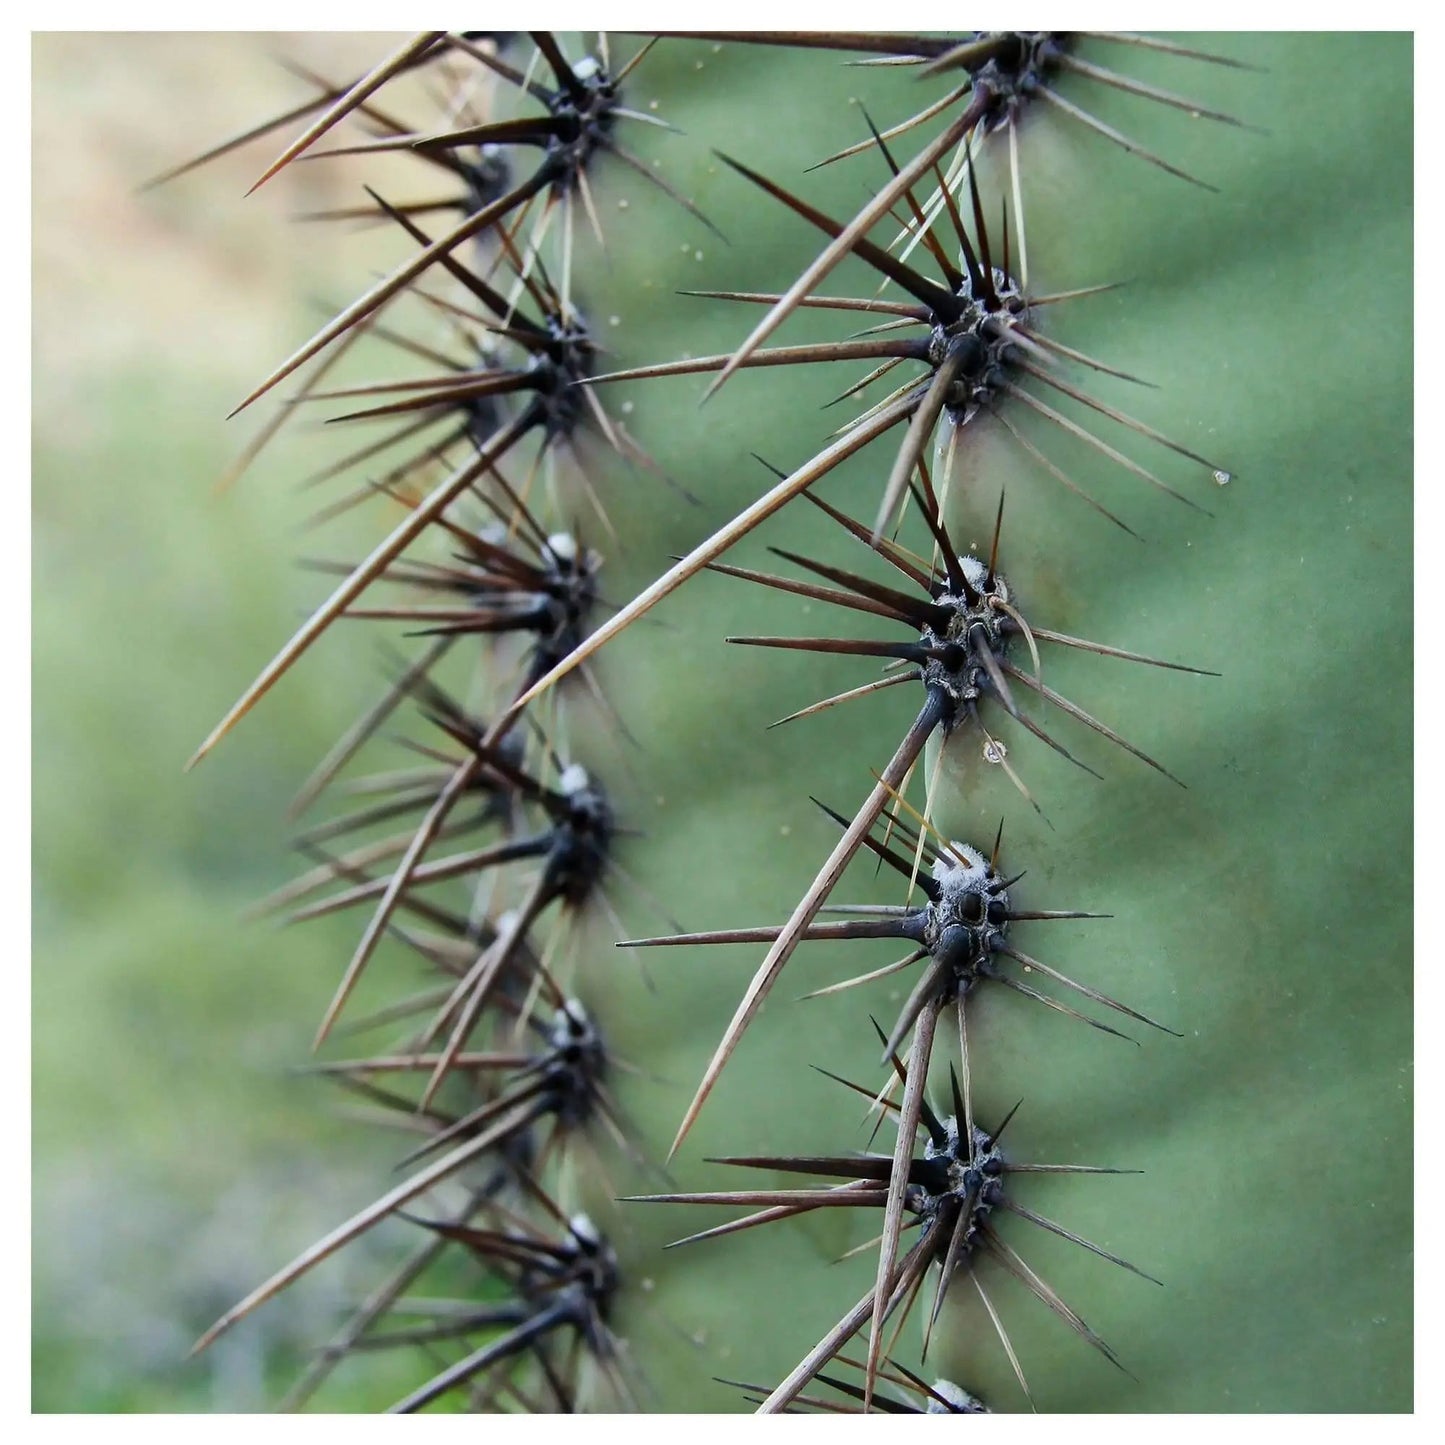 Cactus needles become the focus in art by Lisa Blount